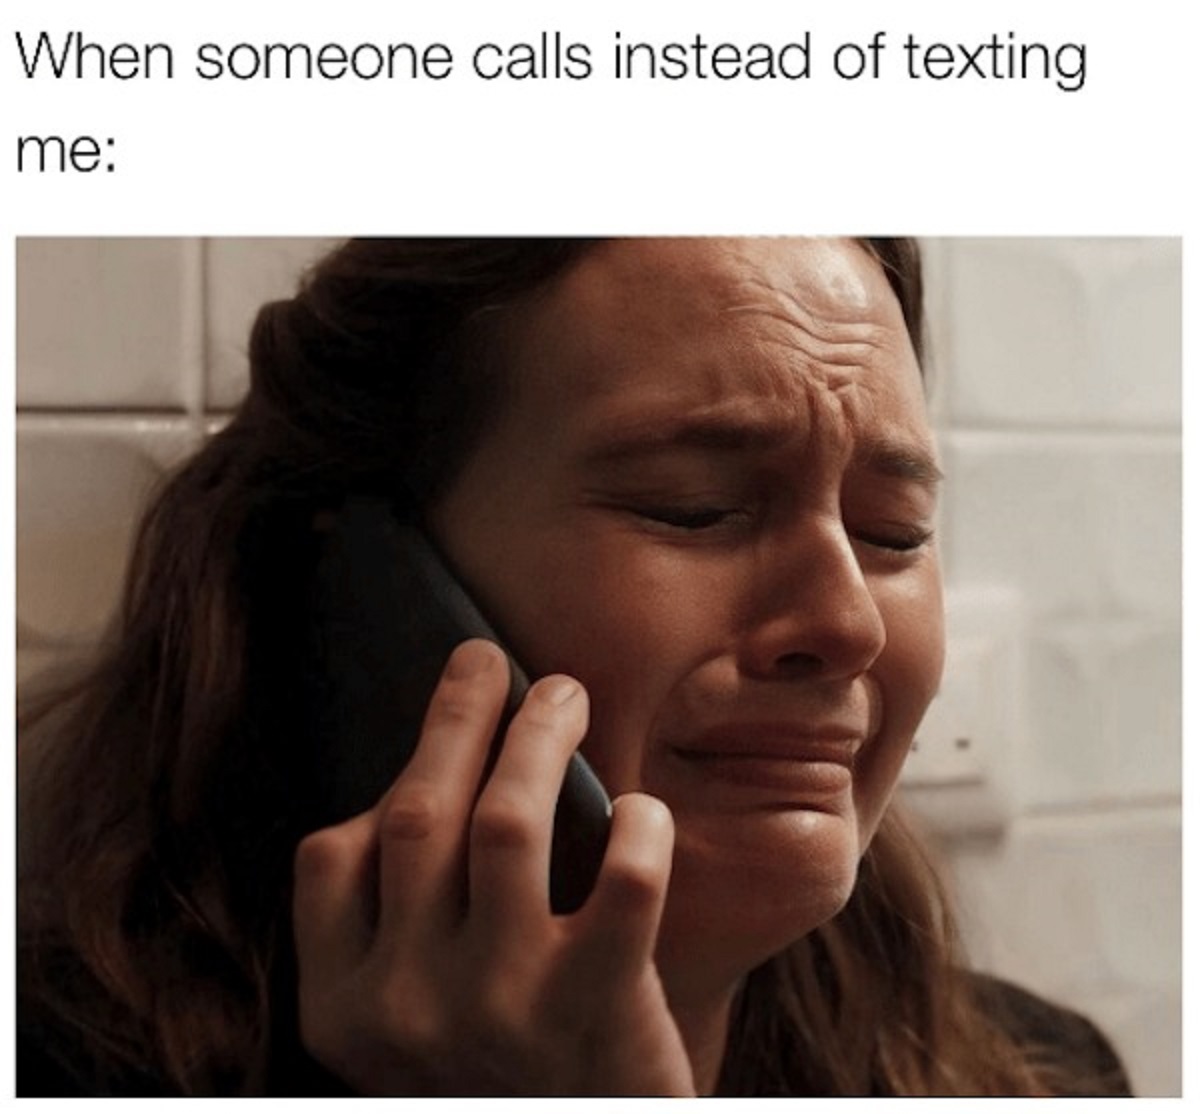 girl - When someone calls instead of texting me